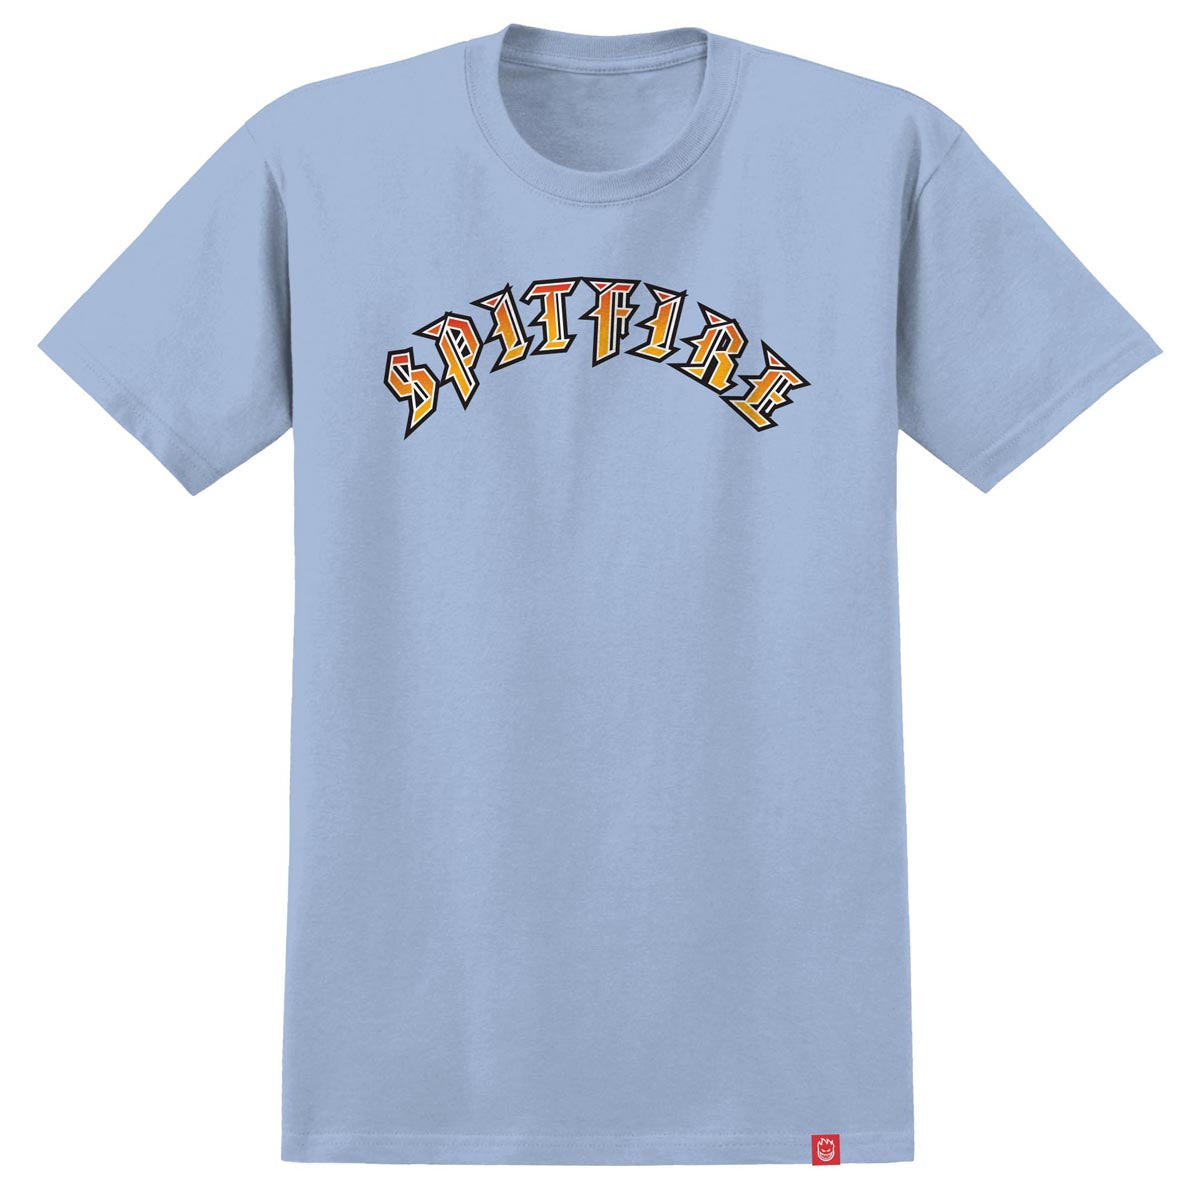 Spitfire Old E Fade Fill T-Shirt - Light Blue/Red Gold Fade image 1